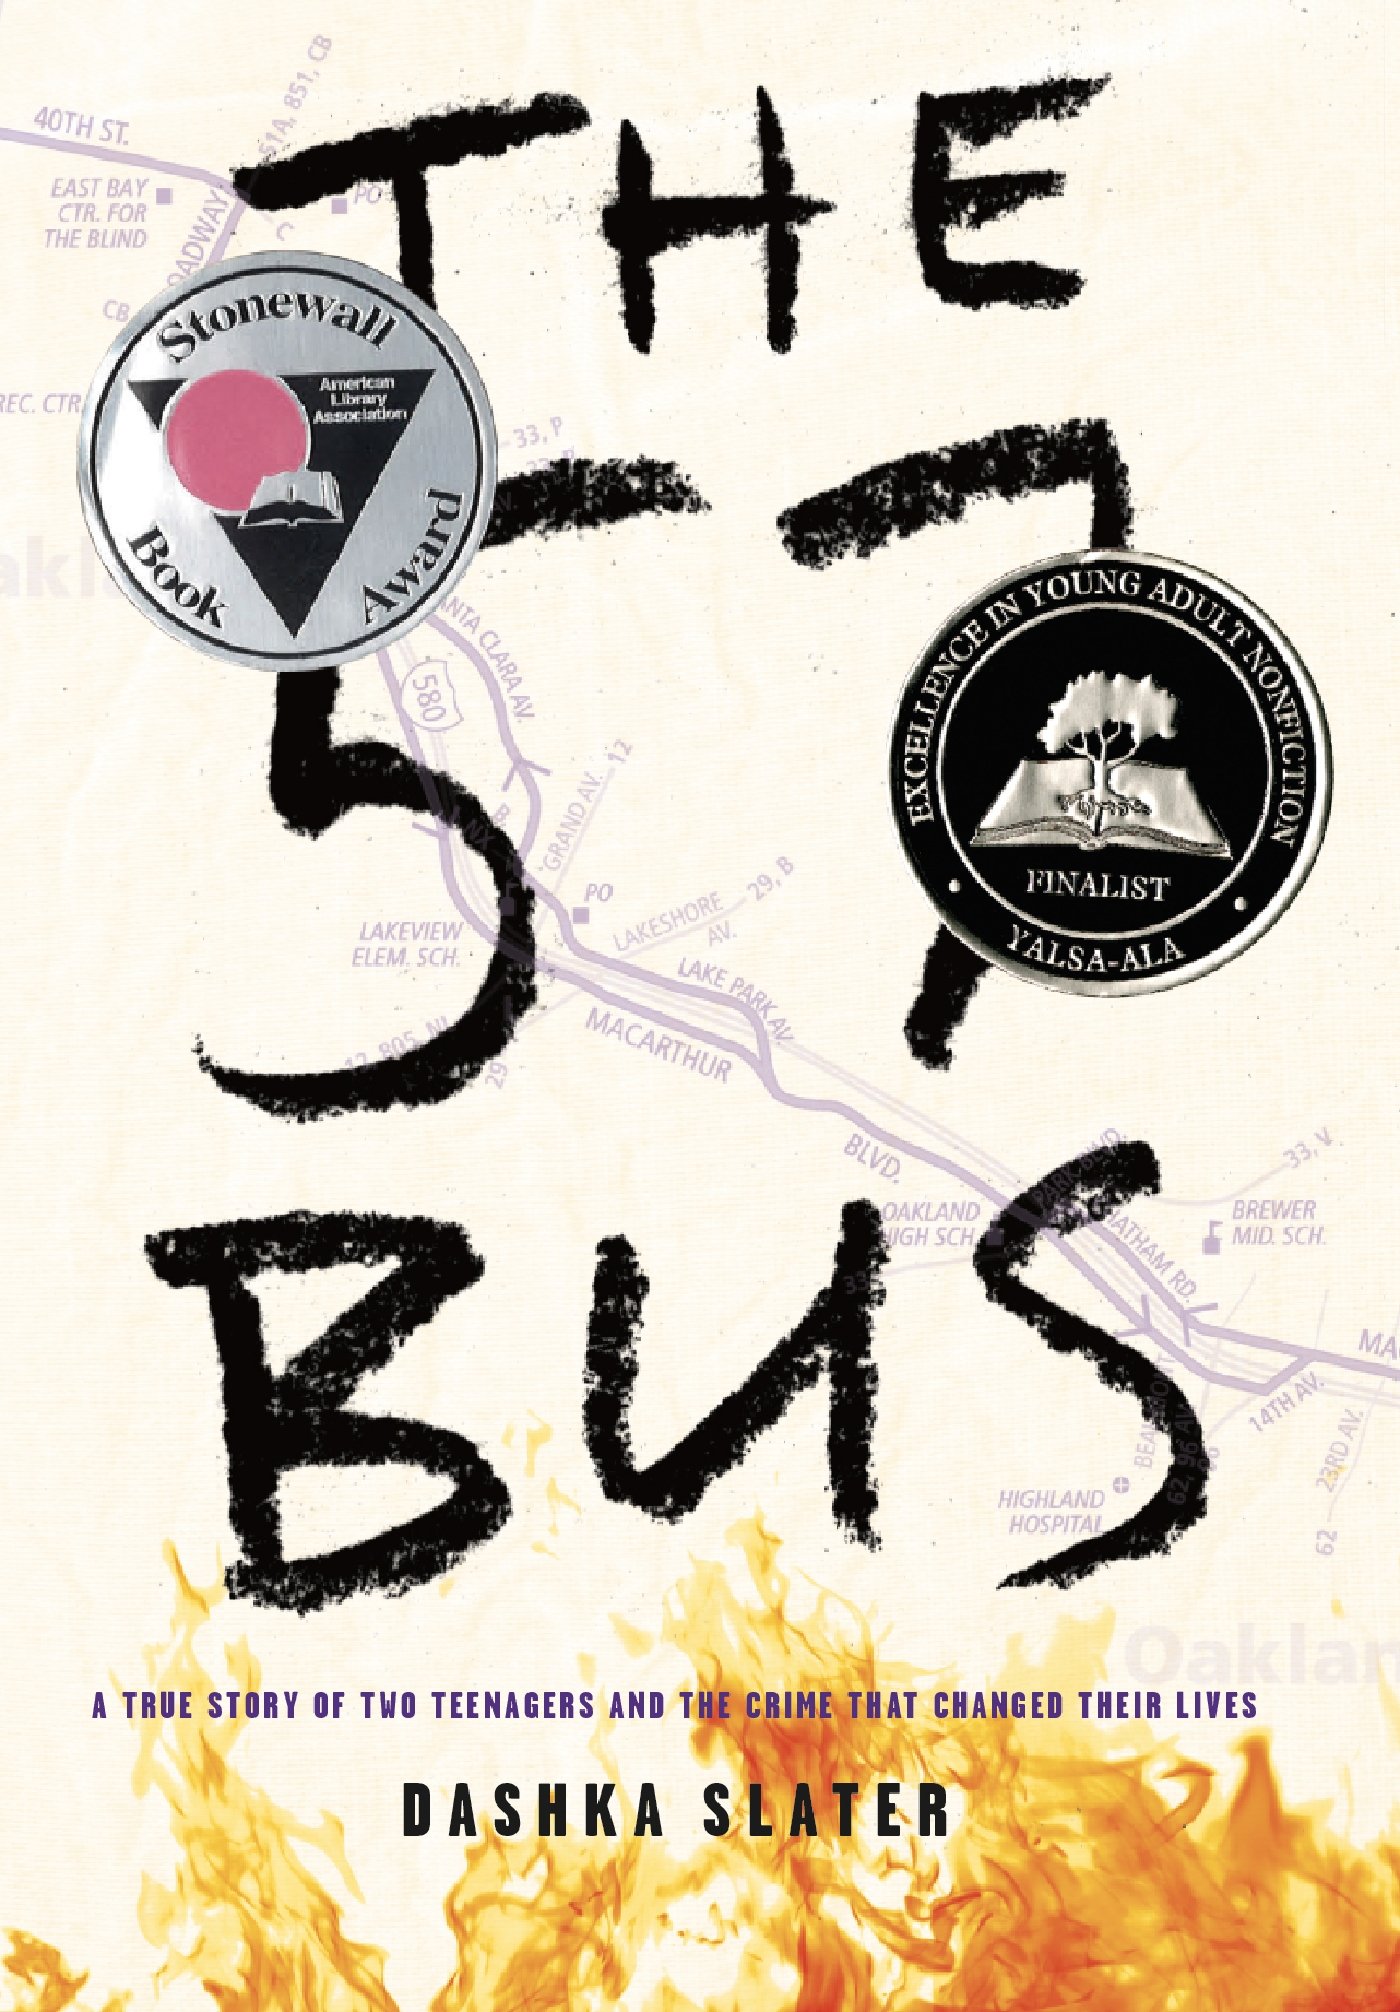 Book cover image of The 57 Bus by Dashka Slater.